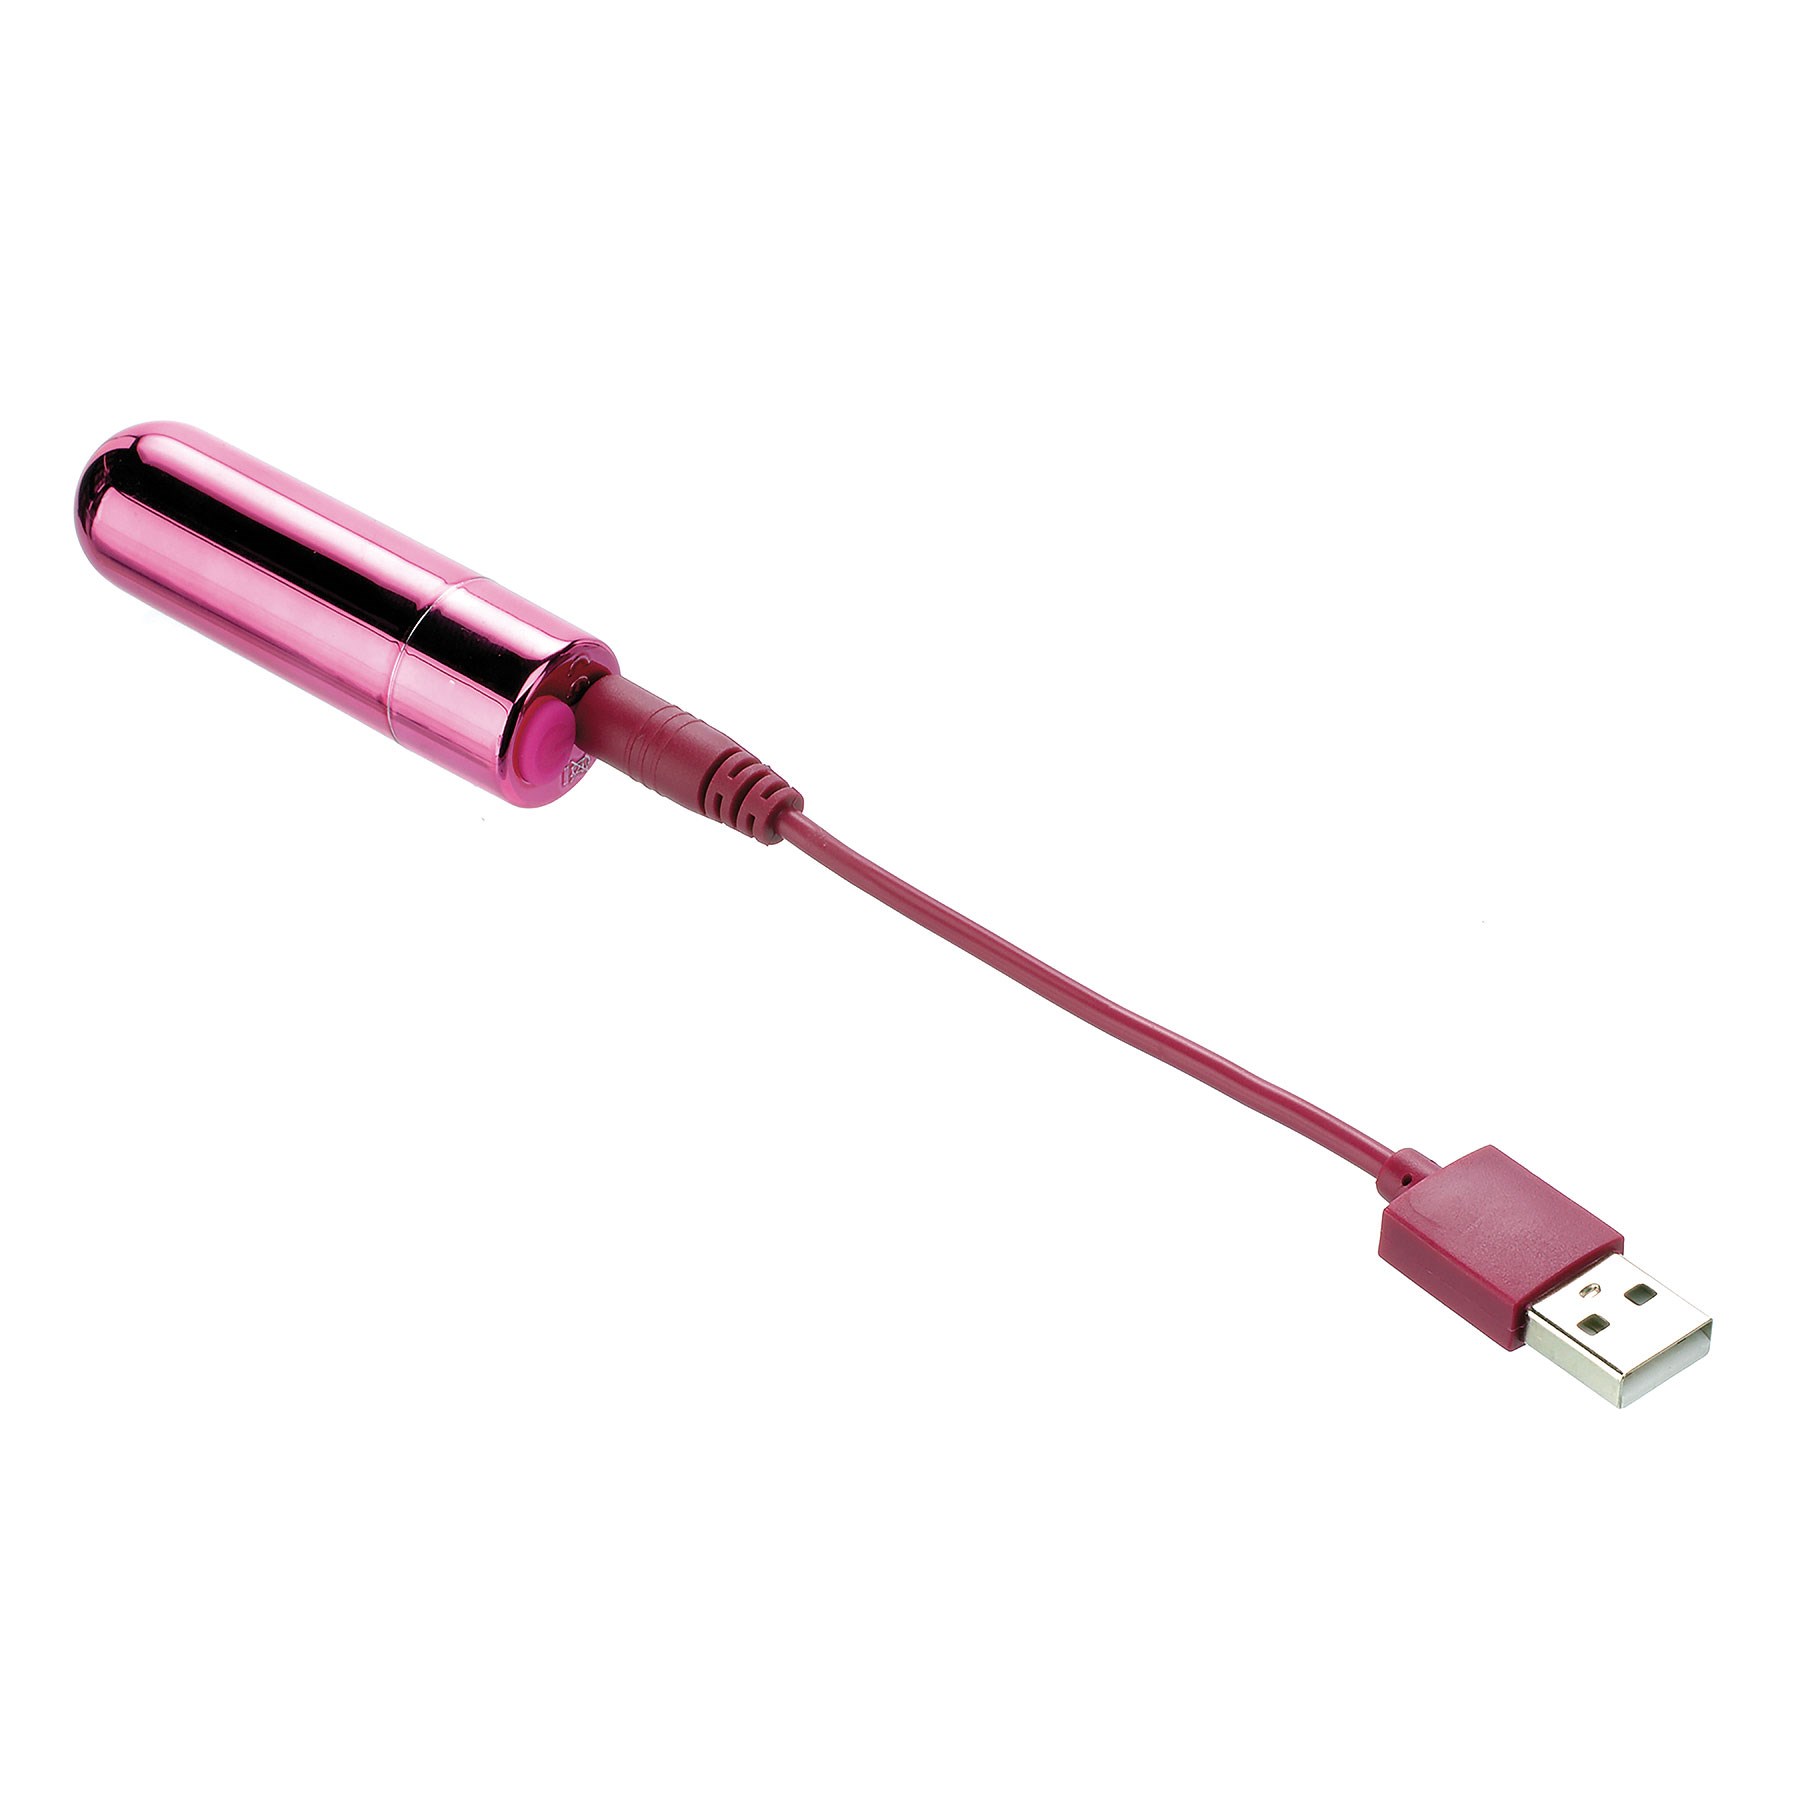 Rechargeable Power Bullet pink with charger cord